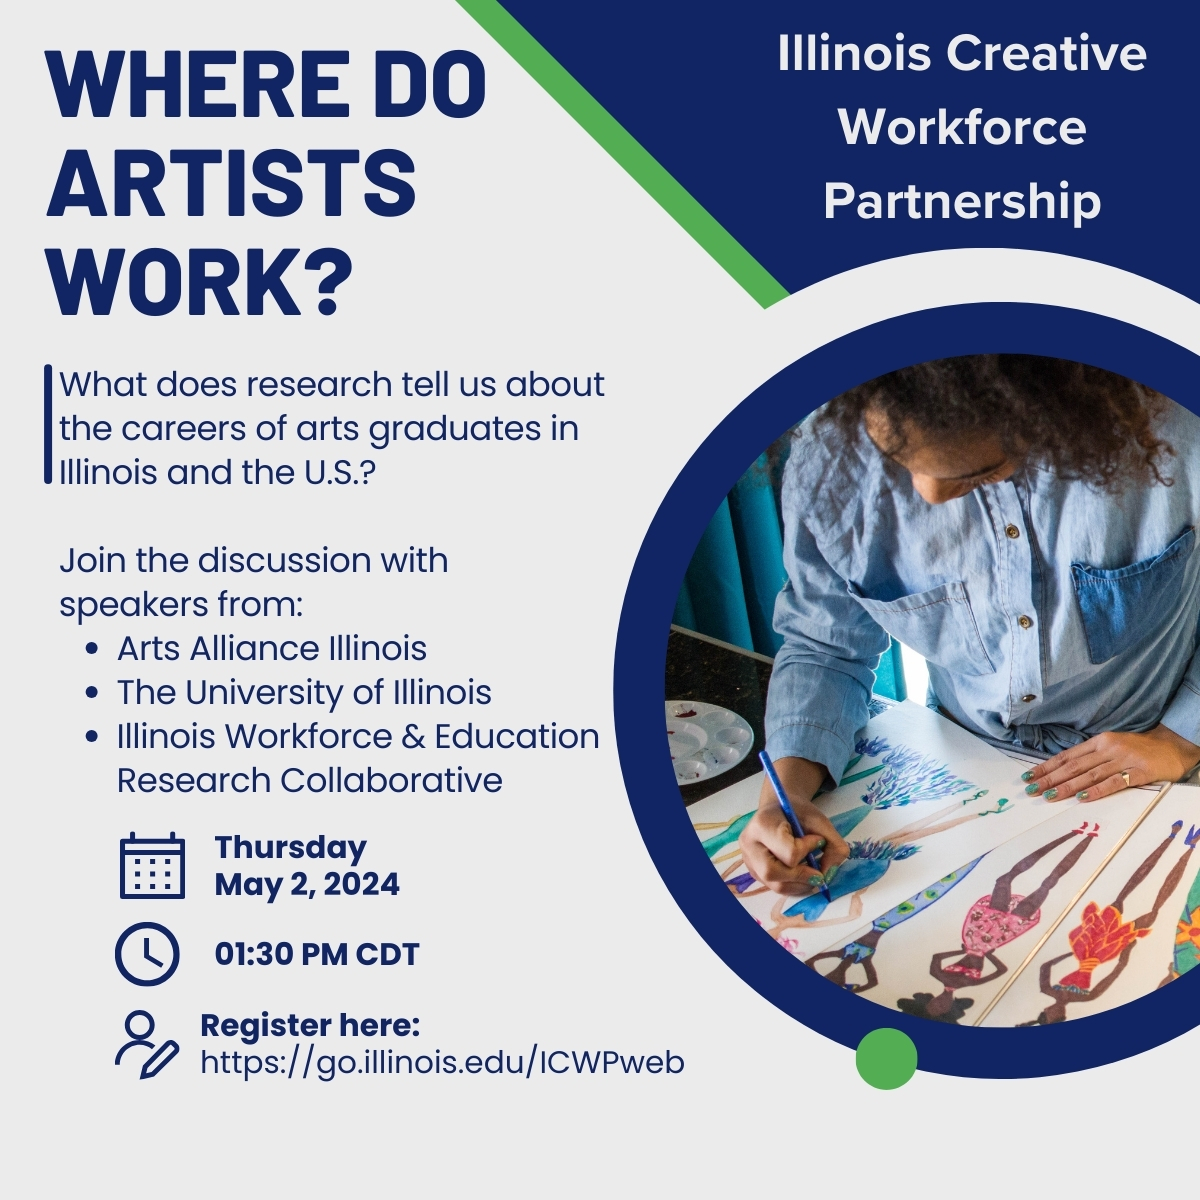 Join our webinar this Thursday, May 2, 2024, 1:30 PM Central to explore the findings of a study on the diverse career paths of arts graduates, beyond the creative sector. Discover the various fields where arts graduates are making an impact. Register here: go.illinois.edu/ICWPweb